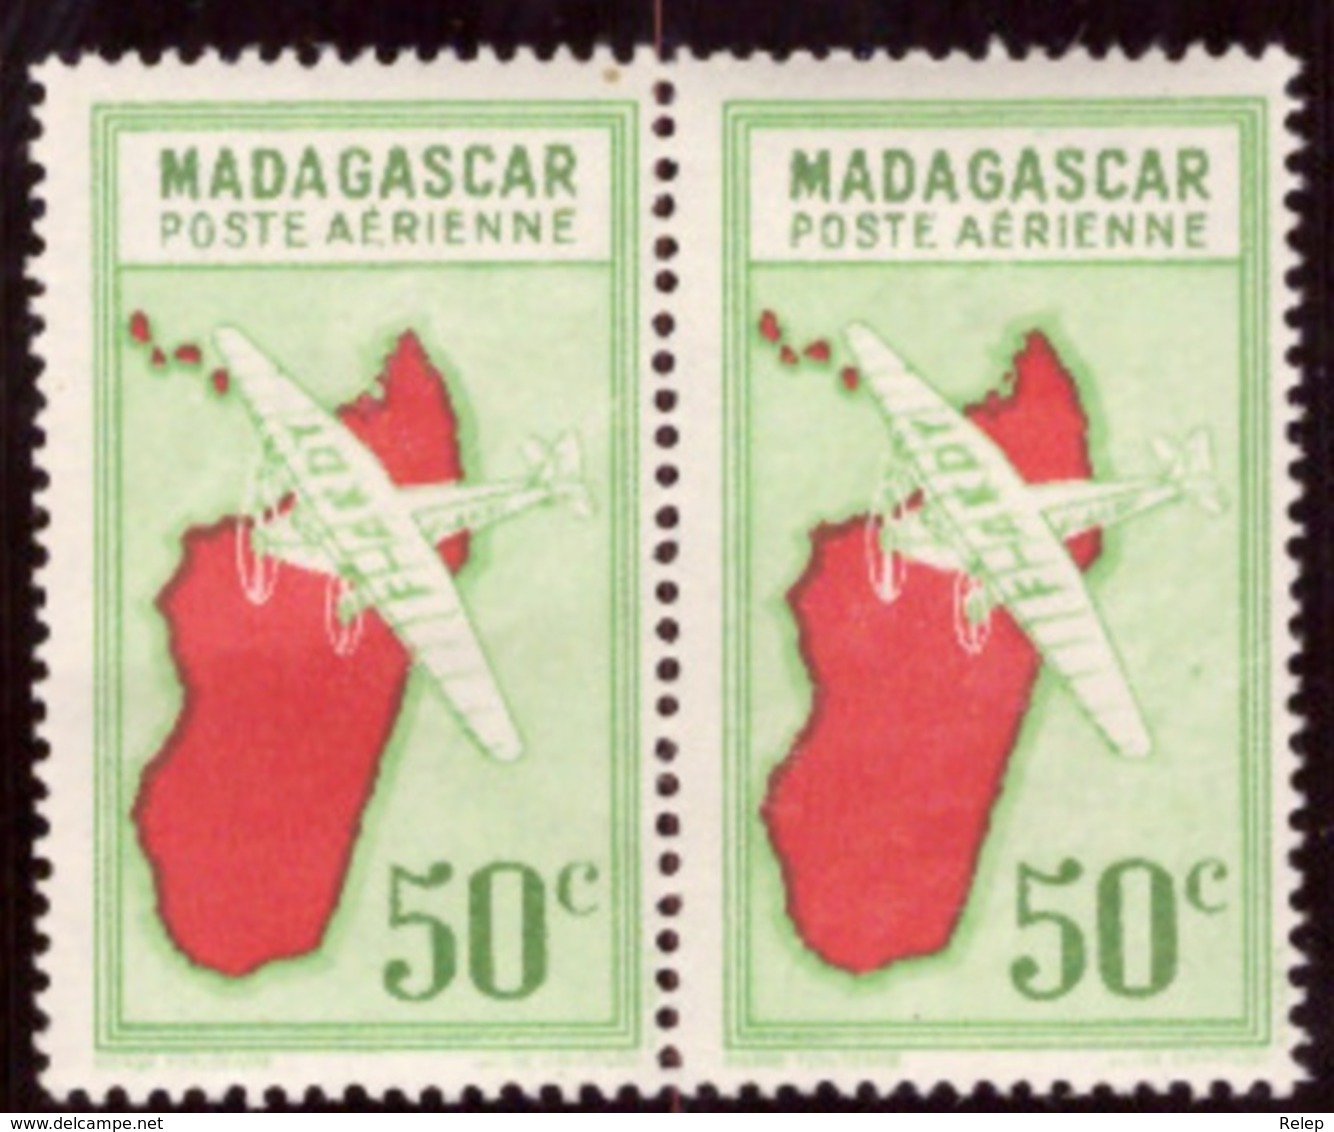 Madagascar - 1942 Airmail - Airplane Over Map Of Madagascar Without "RF" Top Left # MINT # Poste Aérienne 50C - Unused Stamps